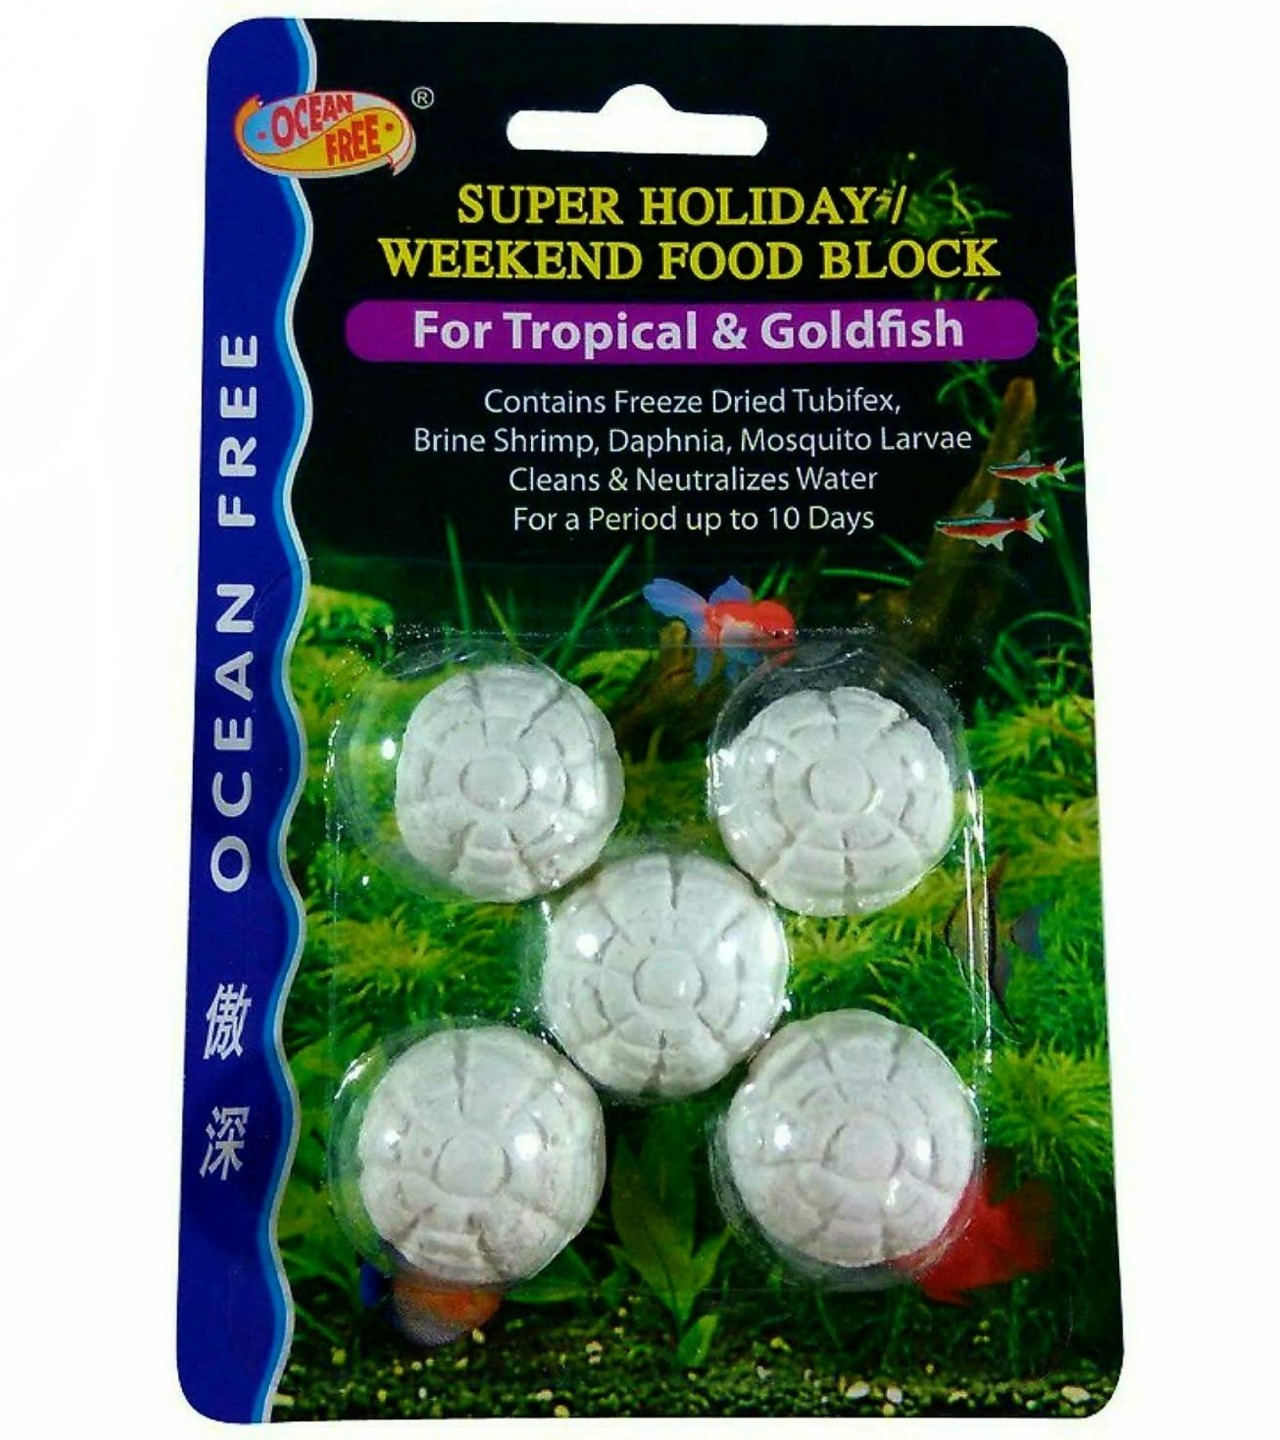 Ocean Free Weekend Fish Food For Tropical & Goldfish 10 Days